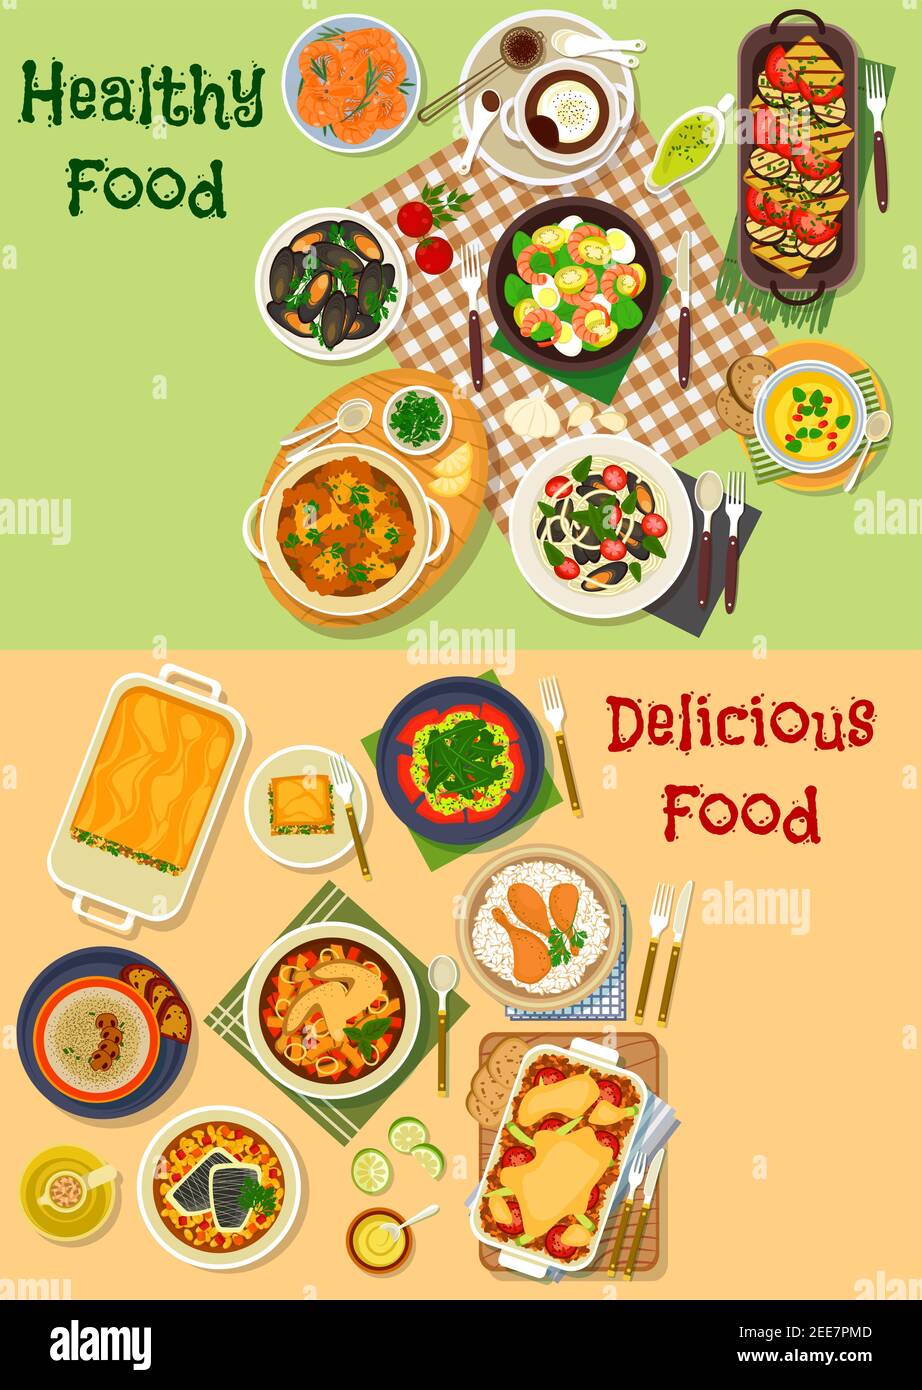 Meat and seafood dishes icon with chicken vegetable stew, shrimp salad, seafood pasta, lasagna, grilled vegetable salad, vegetable cheese soup, grille Stock Vector